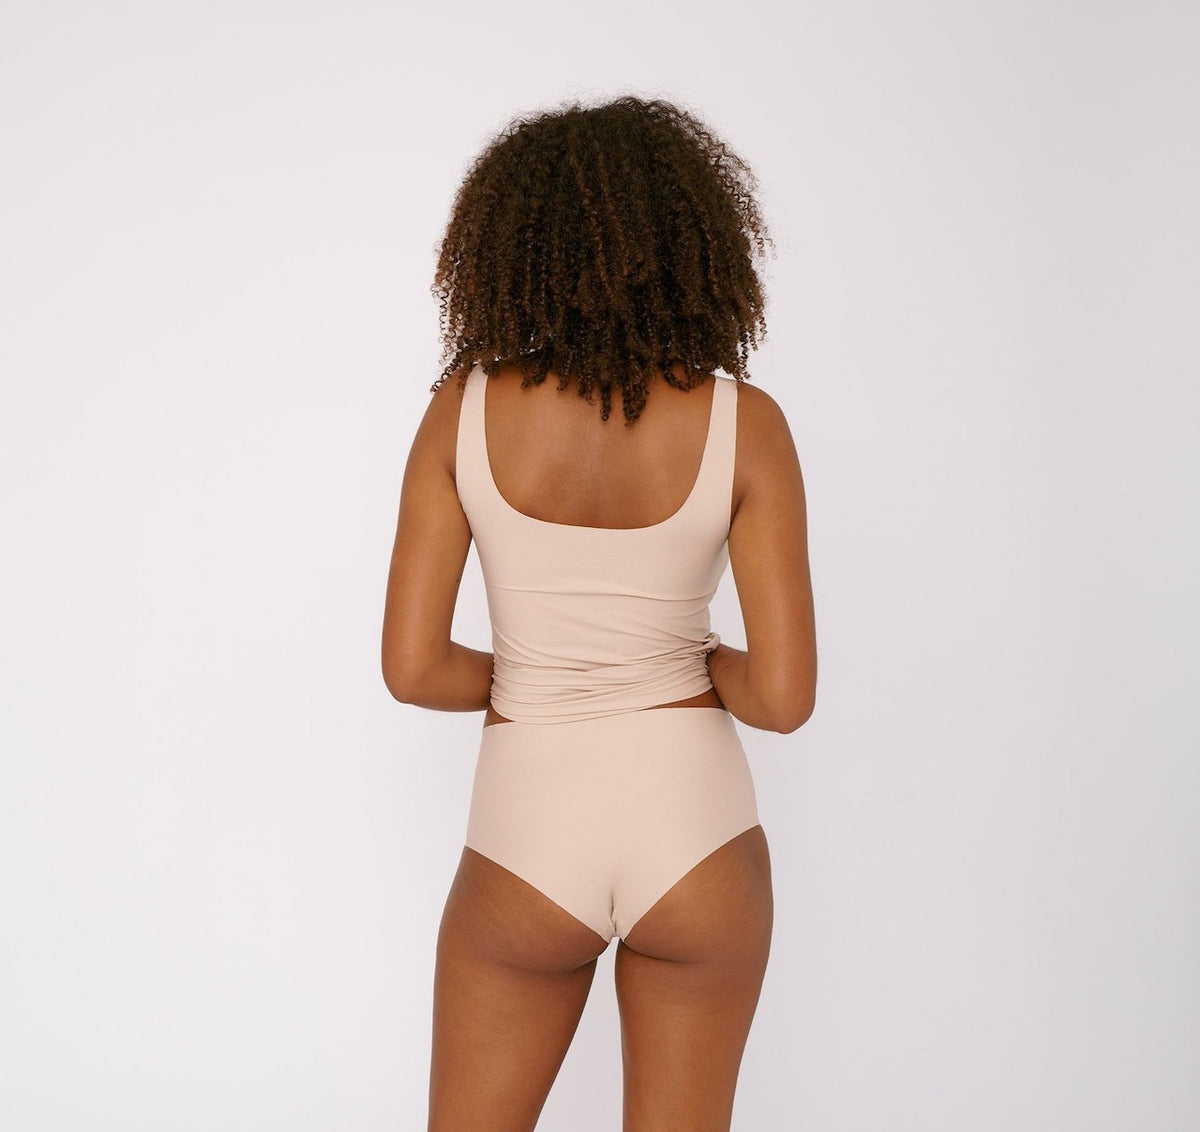 The back view of a woman wearing Organic Basics&#39; Invisible Cheeky High-Rise Briefs (2-pack) – Rose Nude bikini.